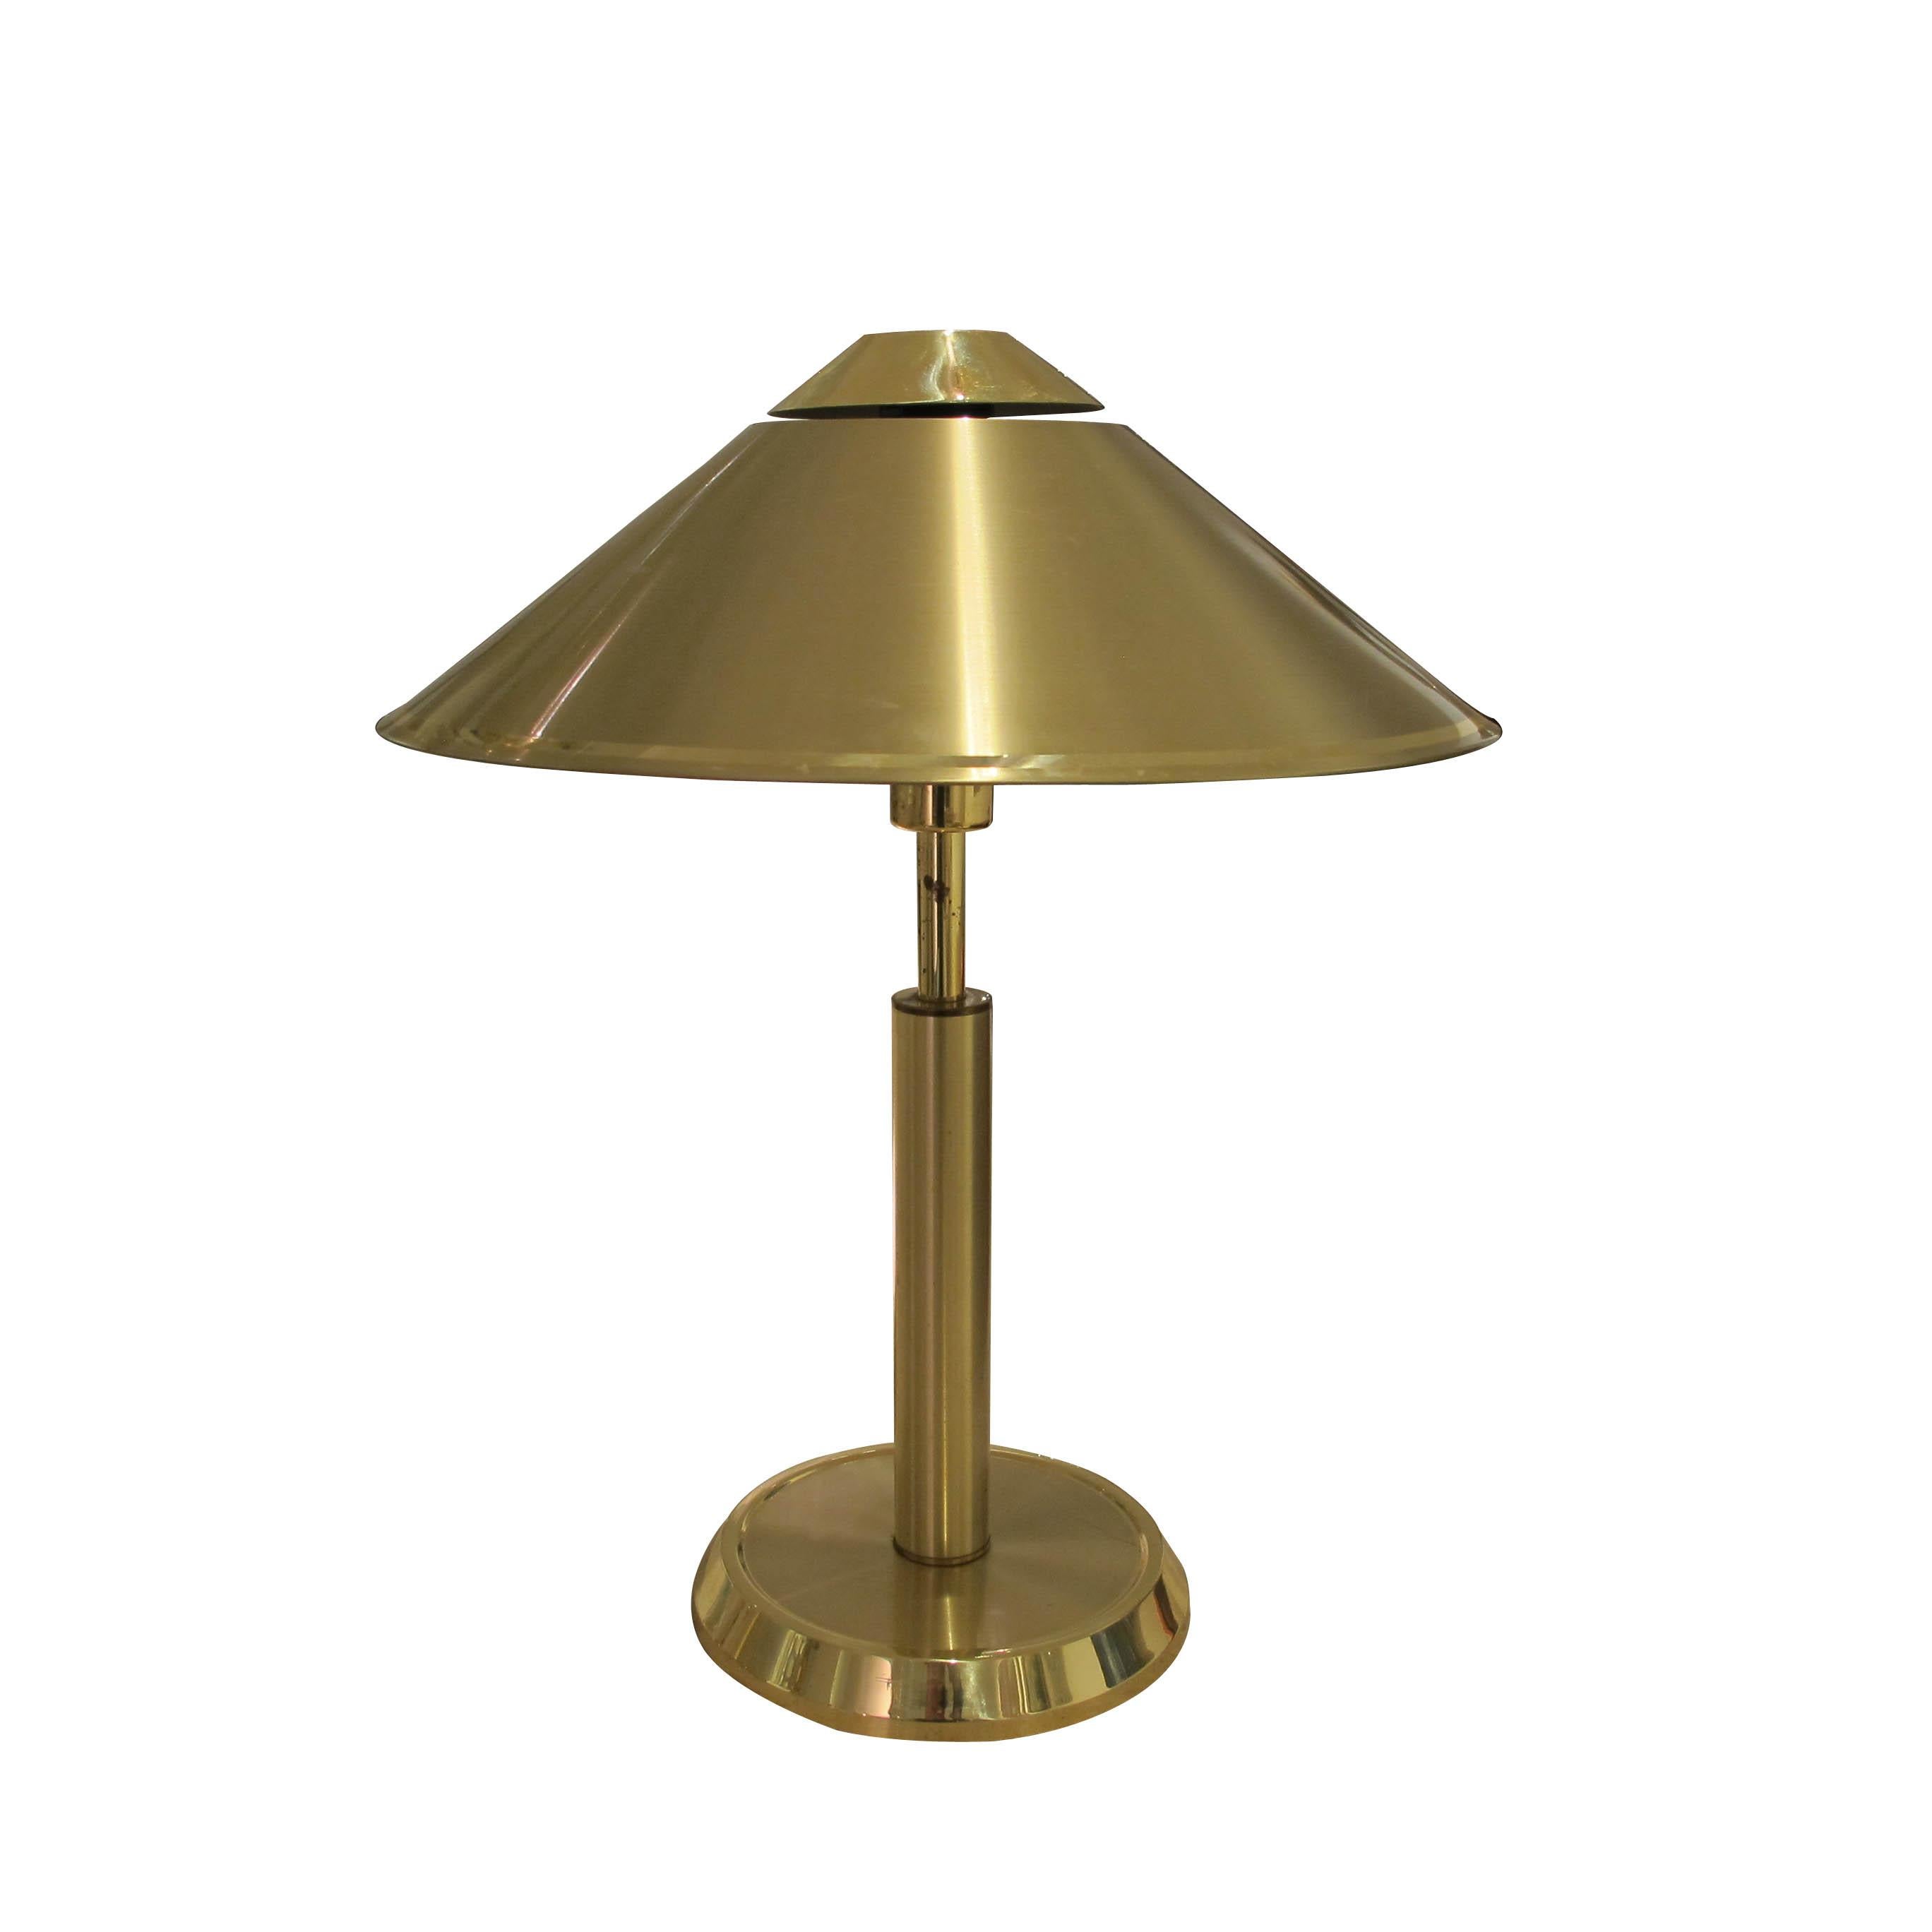 Late 20th Century 1970s Swedish Large Pair Of Brass Table Lamps With Cone Shaped Shades For Sale